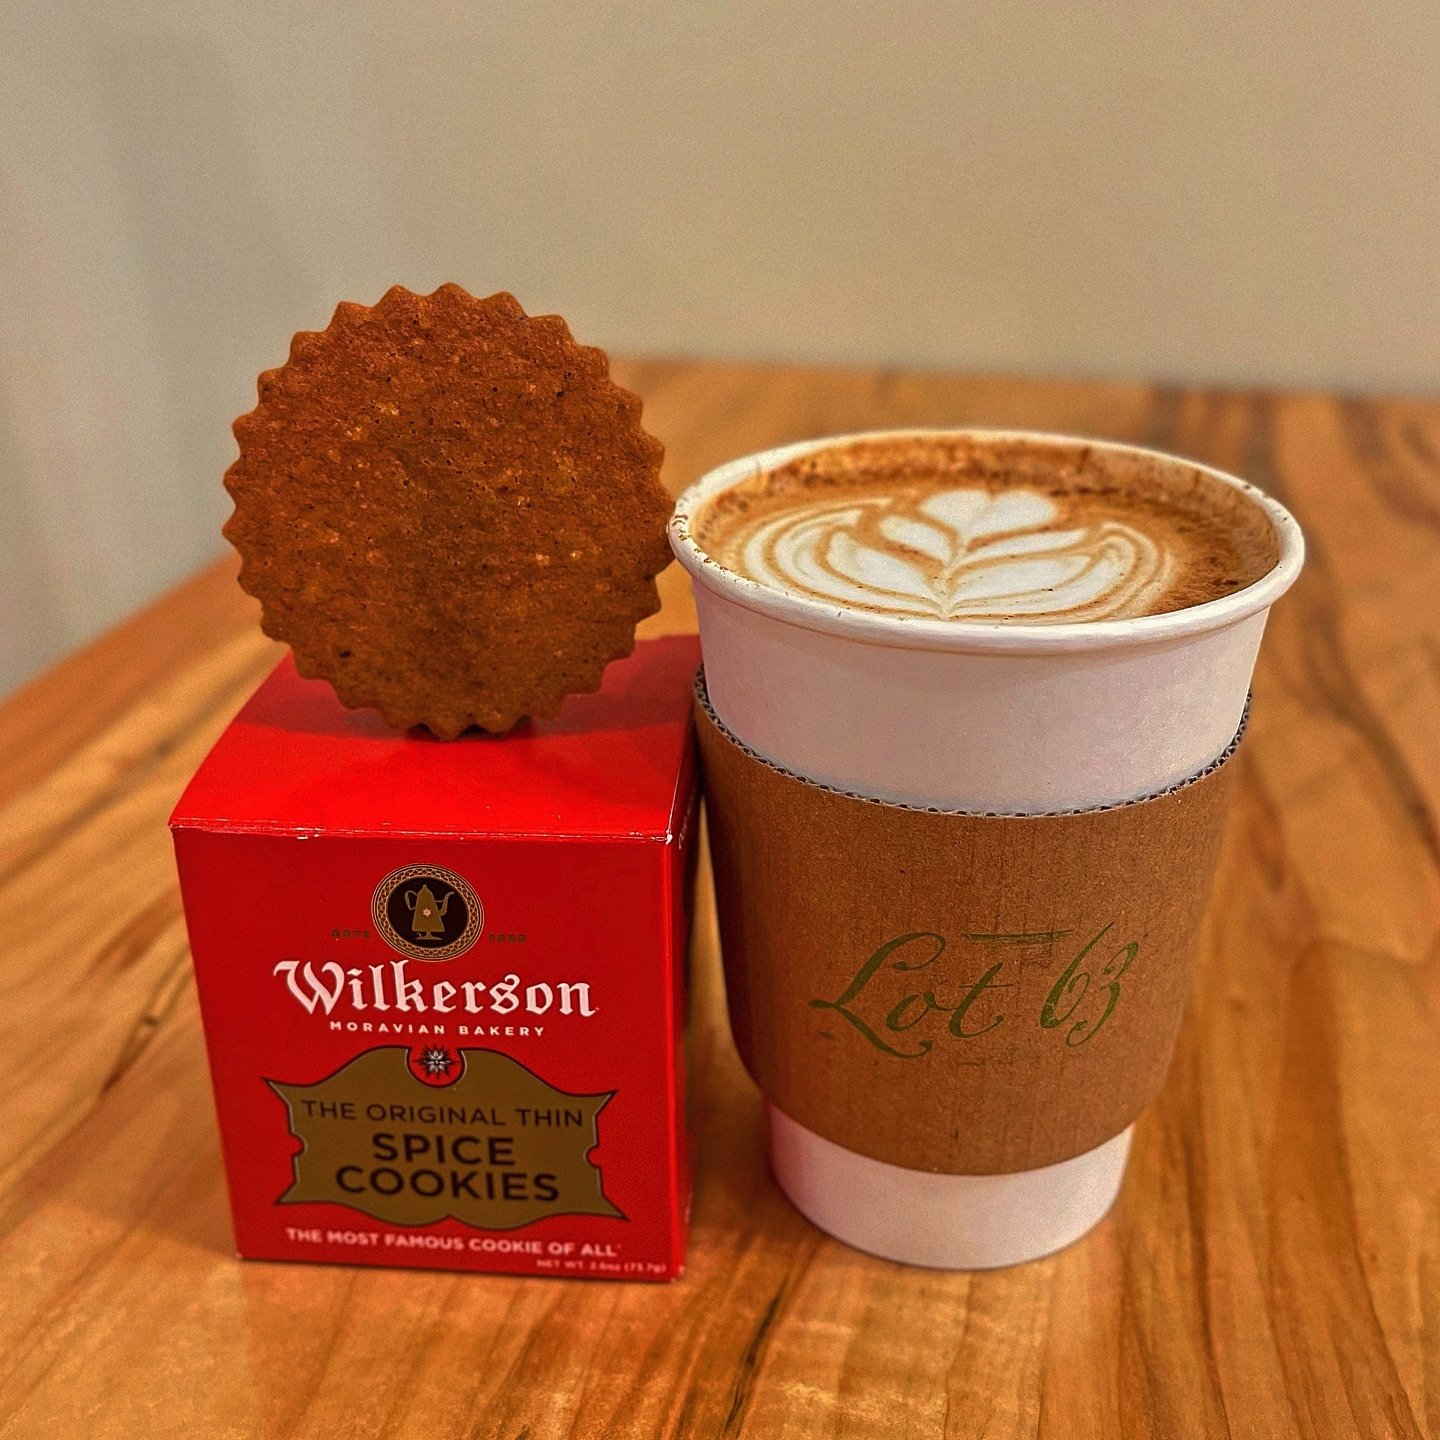 Lot 63&rsquo;s Signature Latte:  A latte so nice, thanks to Moravian Spice ☕️🍪✨ 

@wilkersonbakery is known for their warm, thin and crisp spice cookies. Thanks to their special spice blend syrup, that same great taste pairs perfectly with our coffe